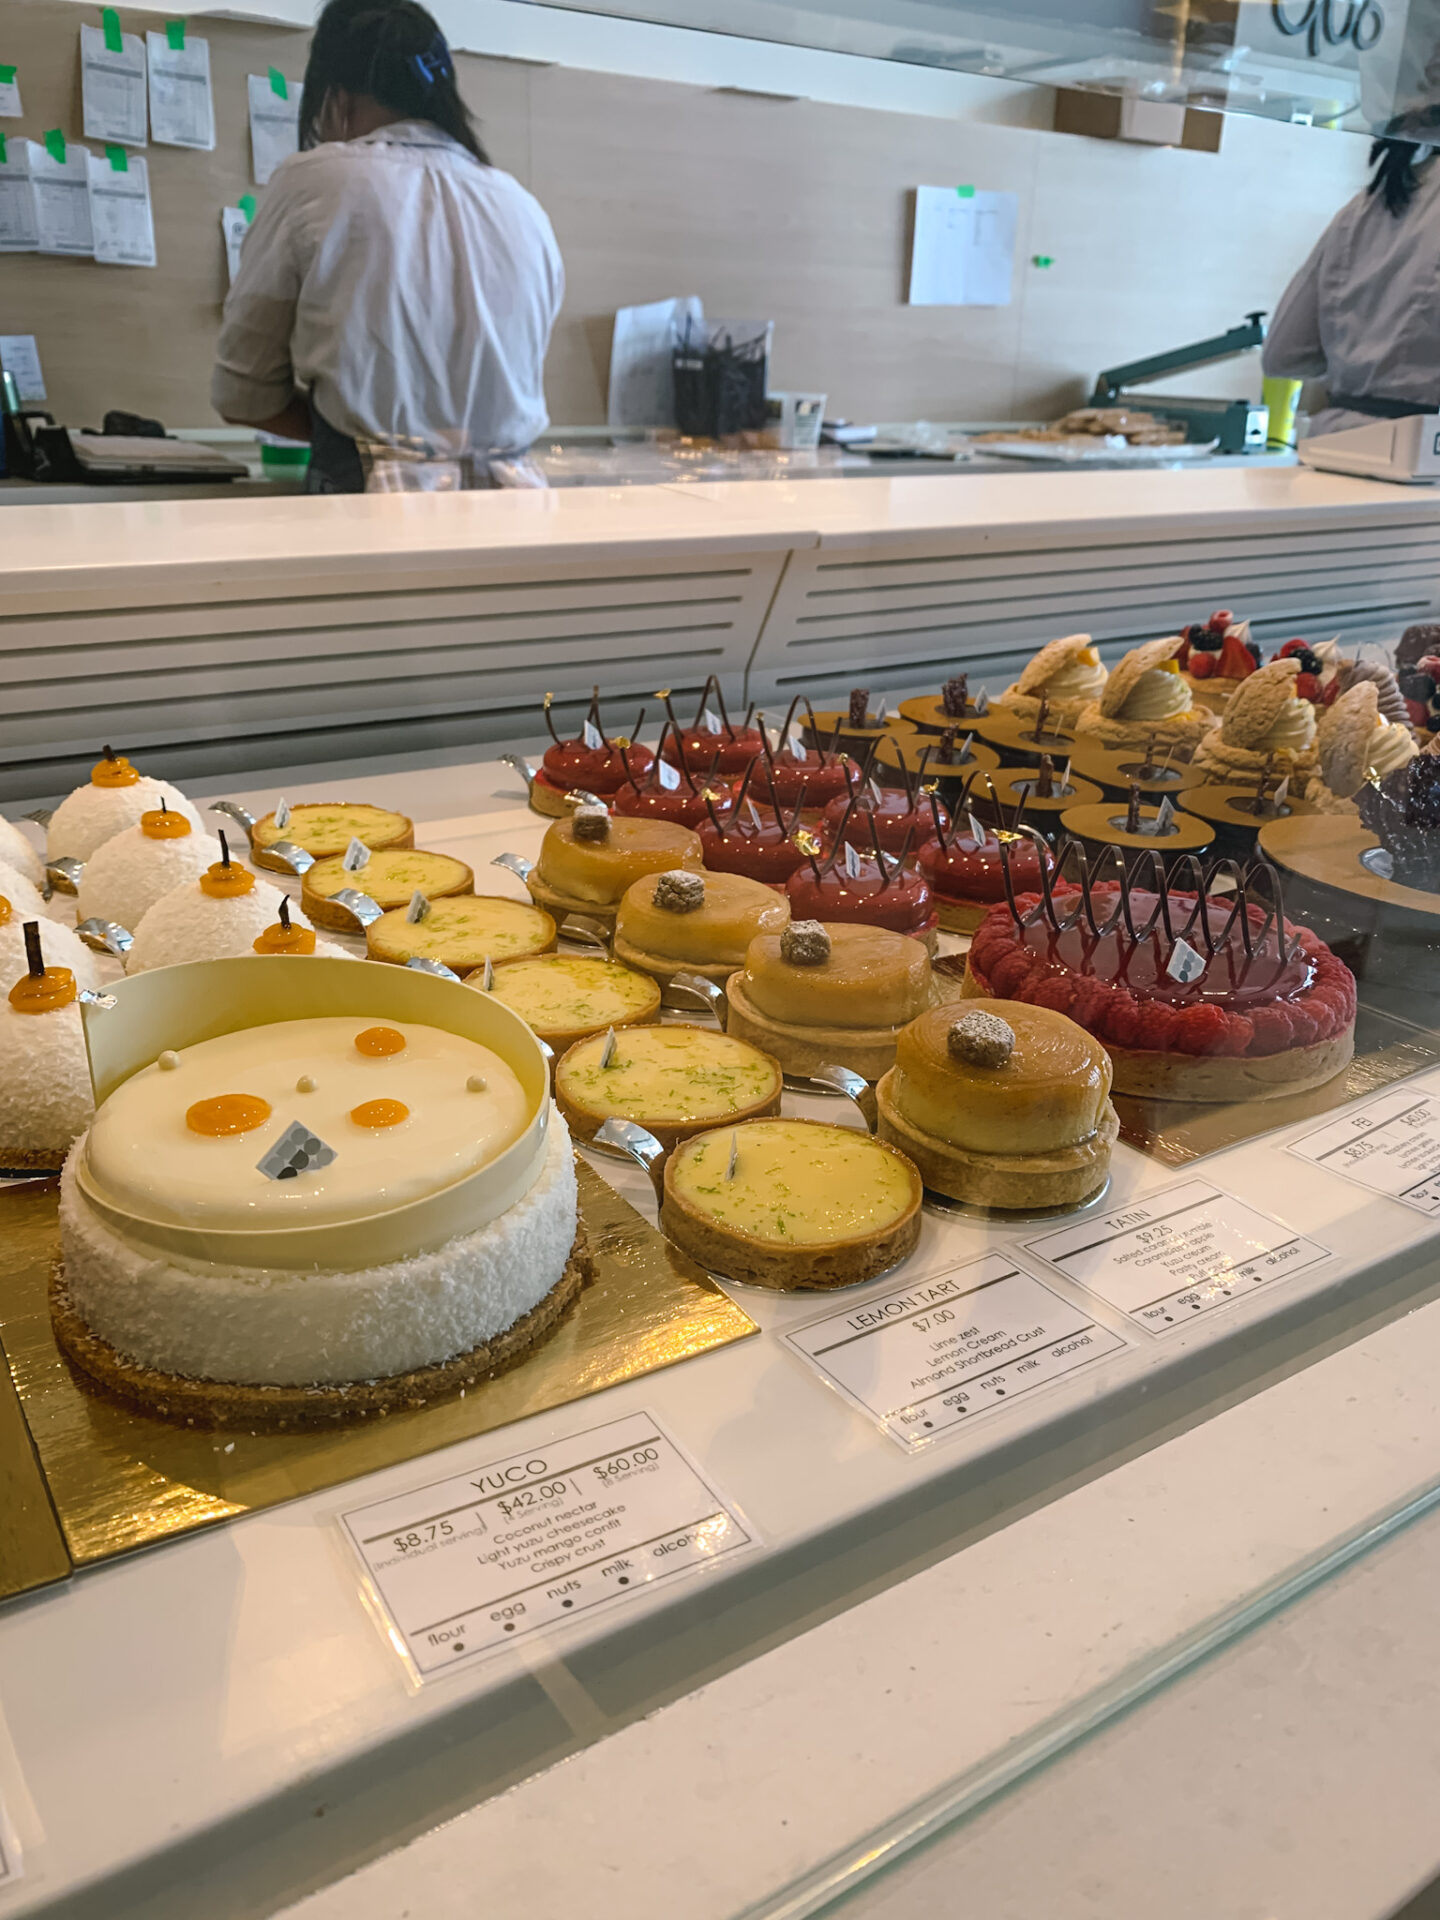 Cakes from Duo Pâtisserie & Café in Markham, Ontario